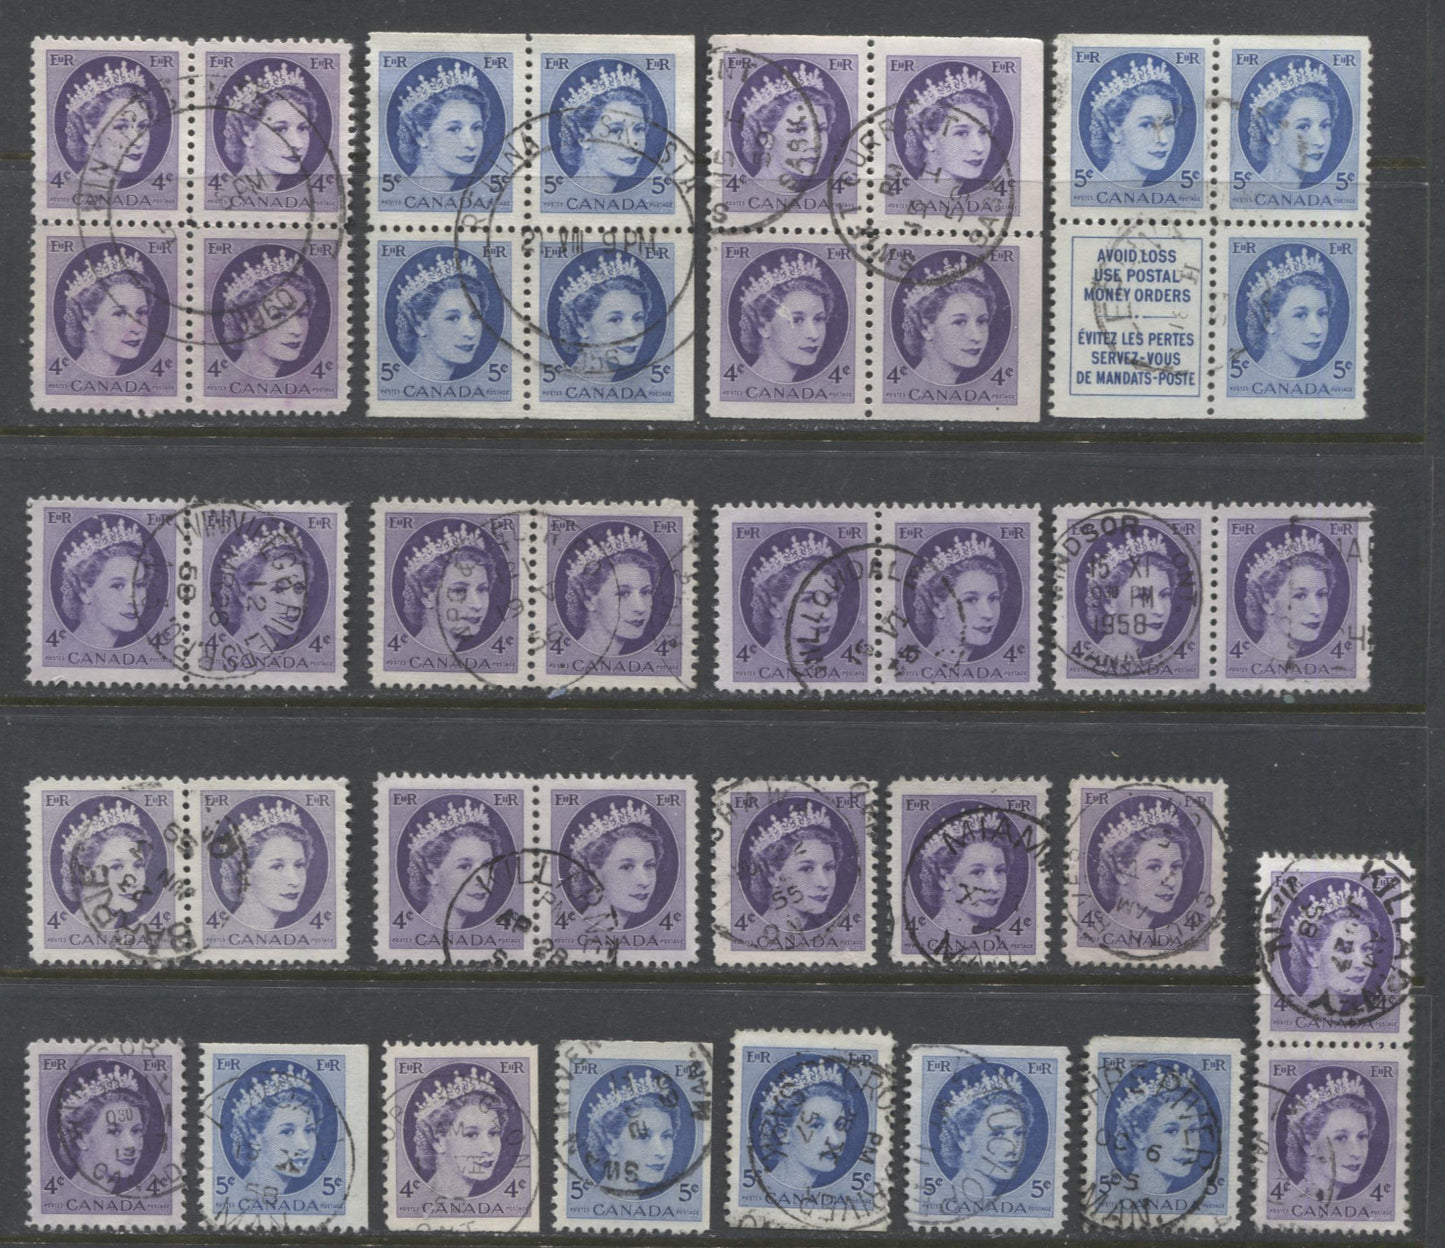 Lot 510 Canada #340, 340as, 341as 4c-5c Violet & Bright Blue Queen Elizabeth II, 1954-1962  Wilding Issue, 10 VF Used Singles, Blocks of 4, 3 Booklet Blocks of 3, & 7 Pairs, With SON Dated CDS Town/RPO Cancels & In-Period